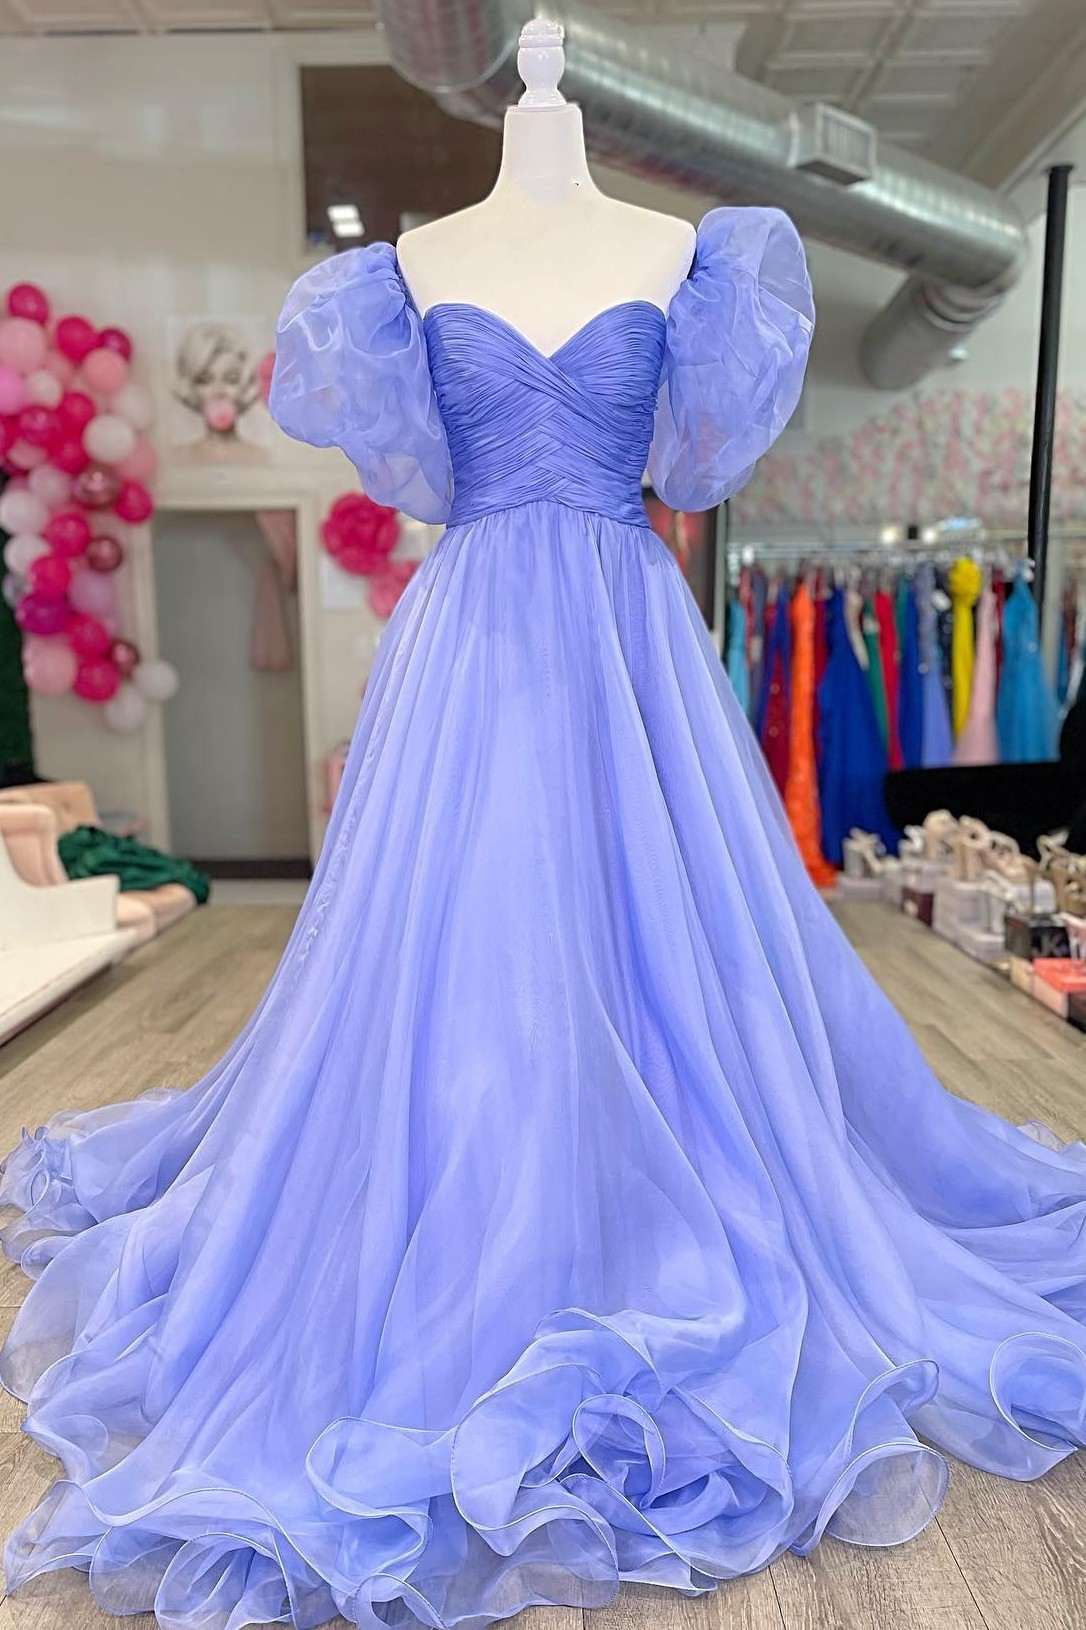 Periwinkle Organza Strapless A-Line Prom Dress with Puff Sleeves